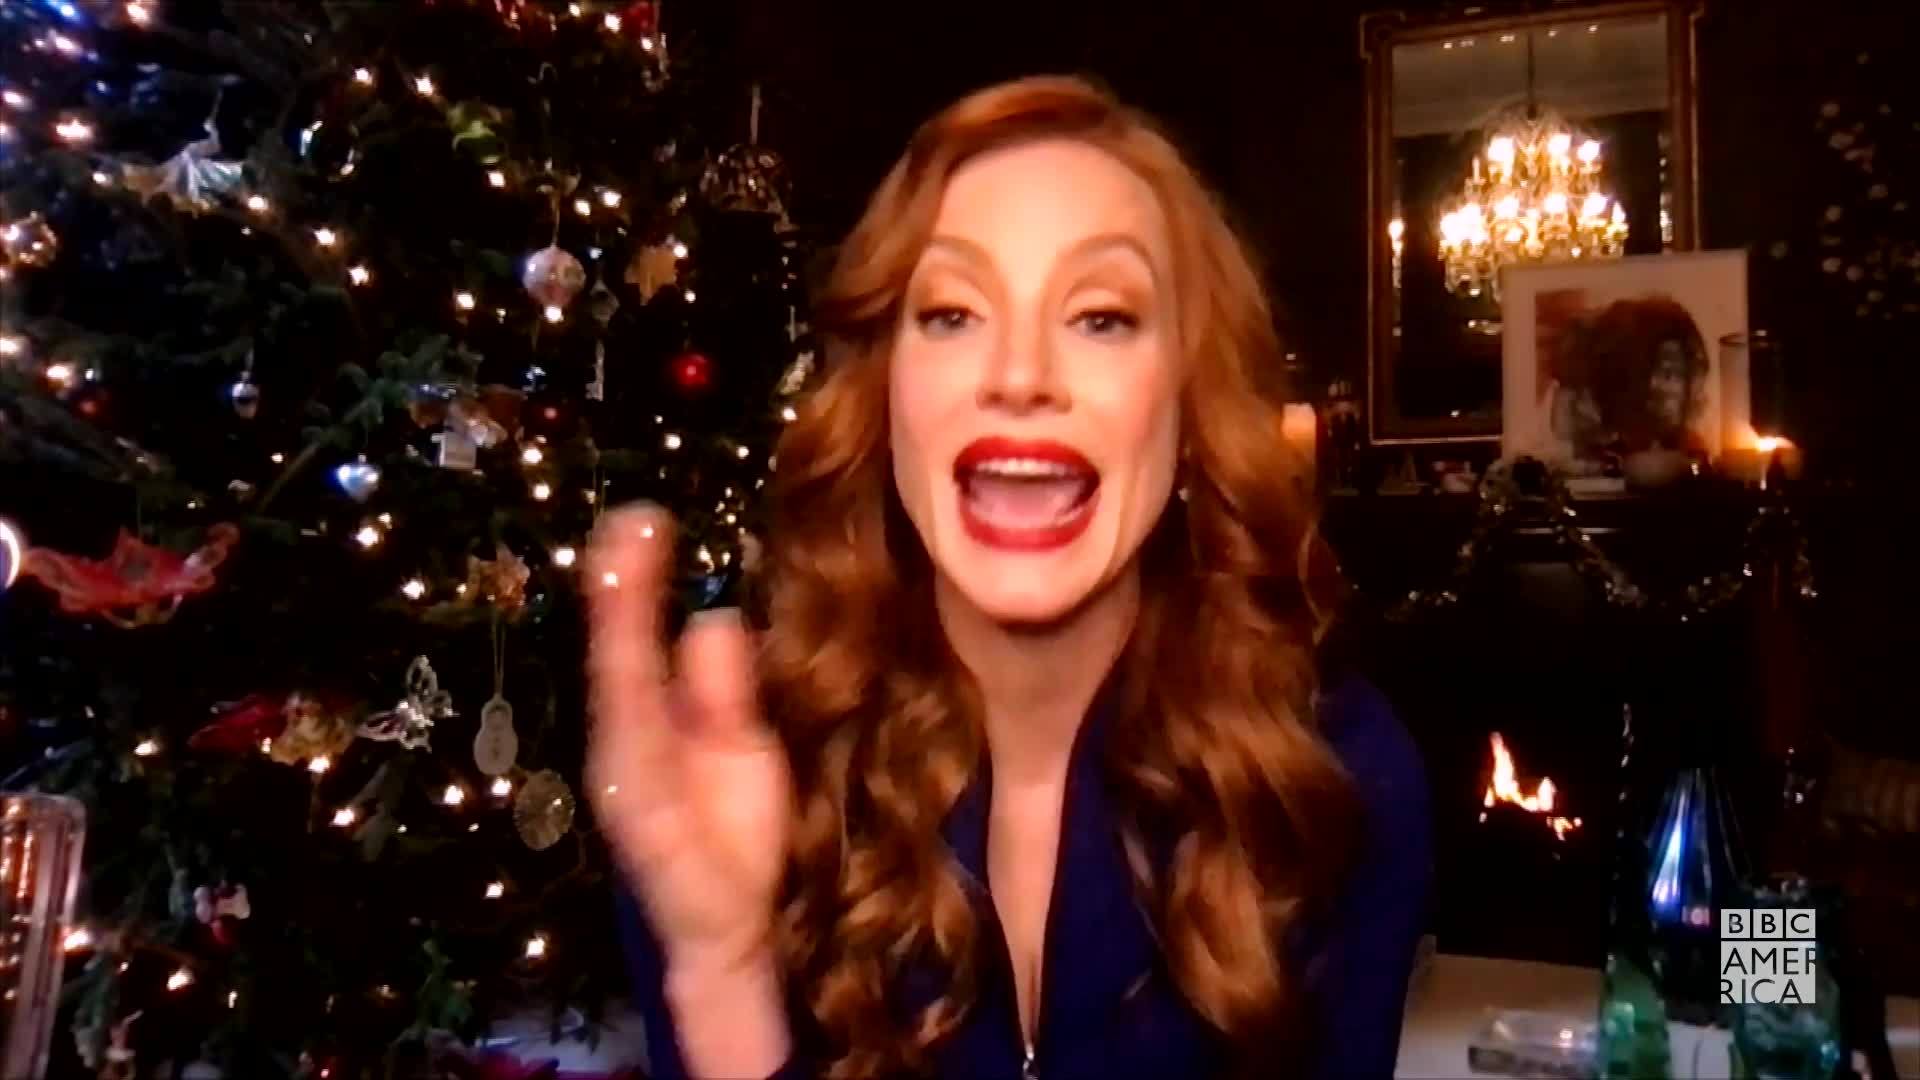 Watch Jessica Chastain’s Hilarious Italian New Year’s Gaffe | The Graham Norton Show Video Extras